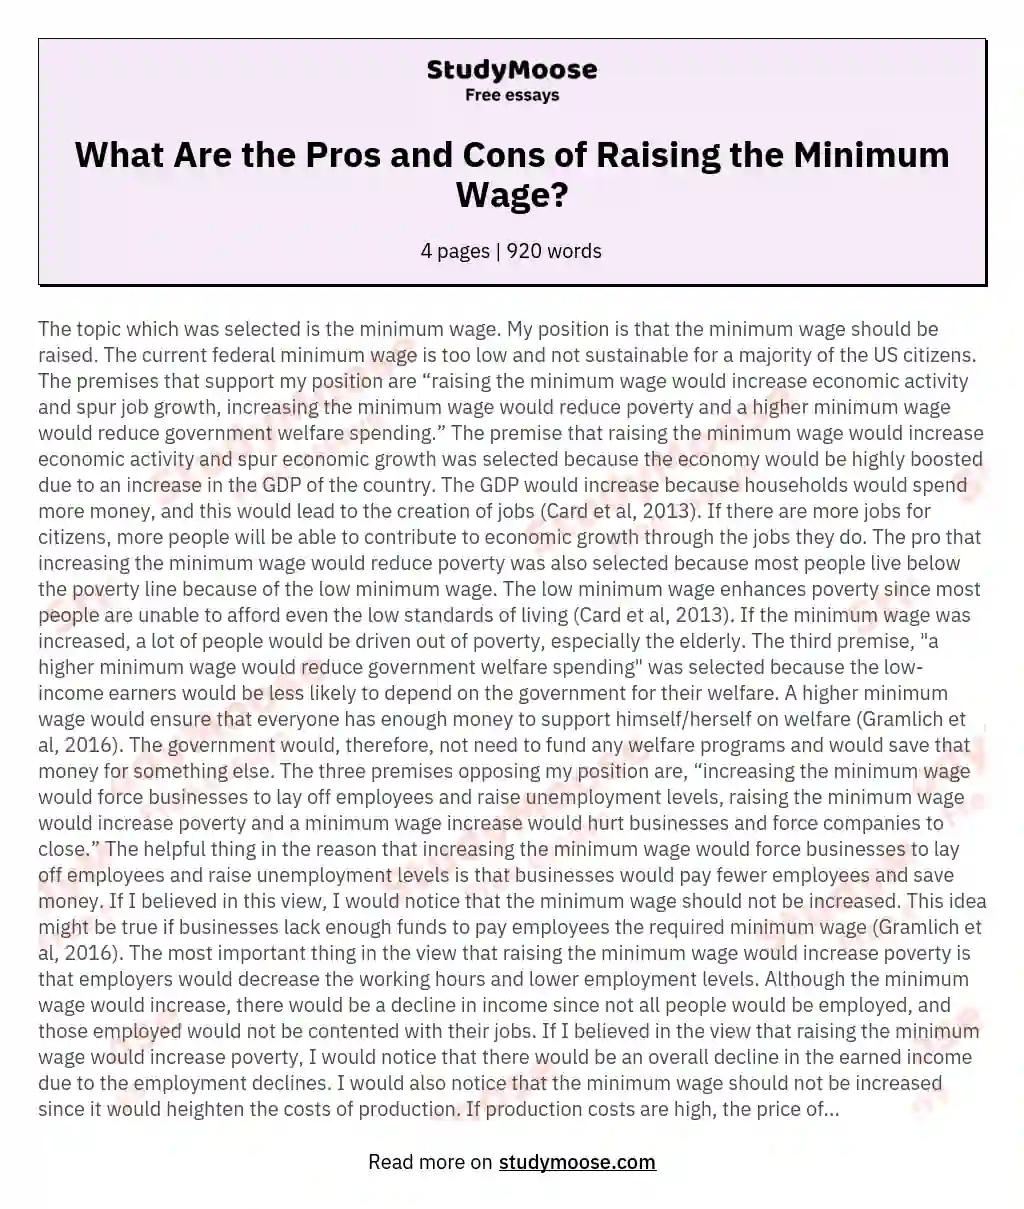 What Are the Pros and Cons of Raising the Minimum Wage?